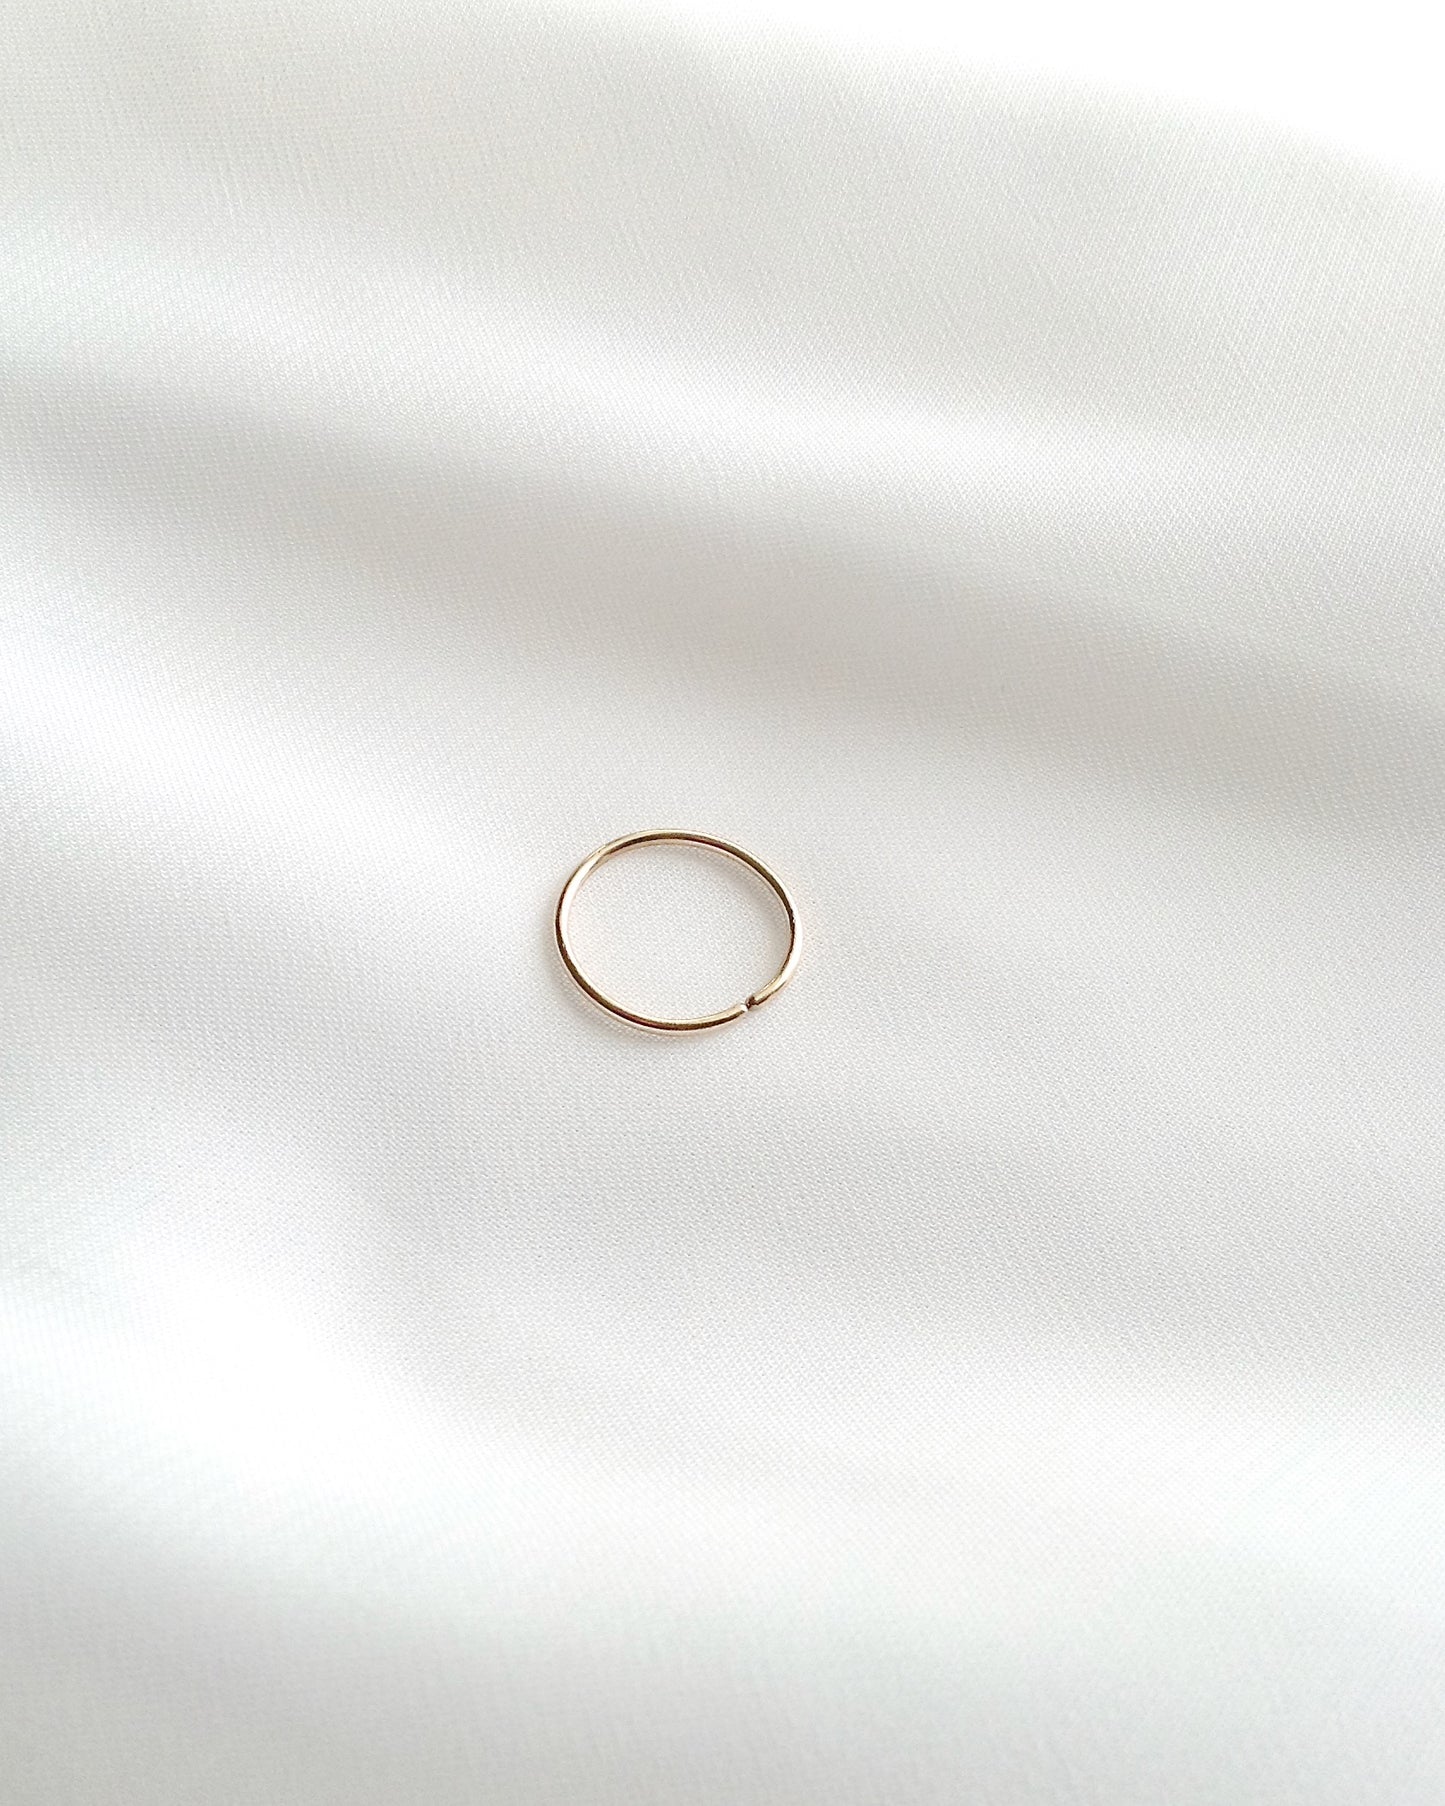 Thin Cartilage Hoop | 4mm 5mm 6mm 7mm 8mm 9mm or 10mm Cartilage Hoop | Small Cartilage Hoop | IB Jewelry